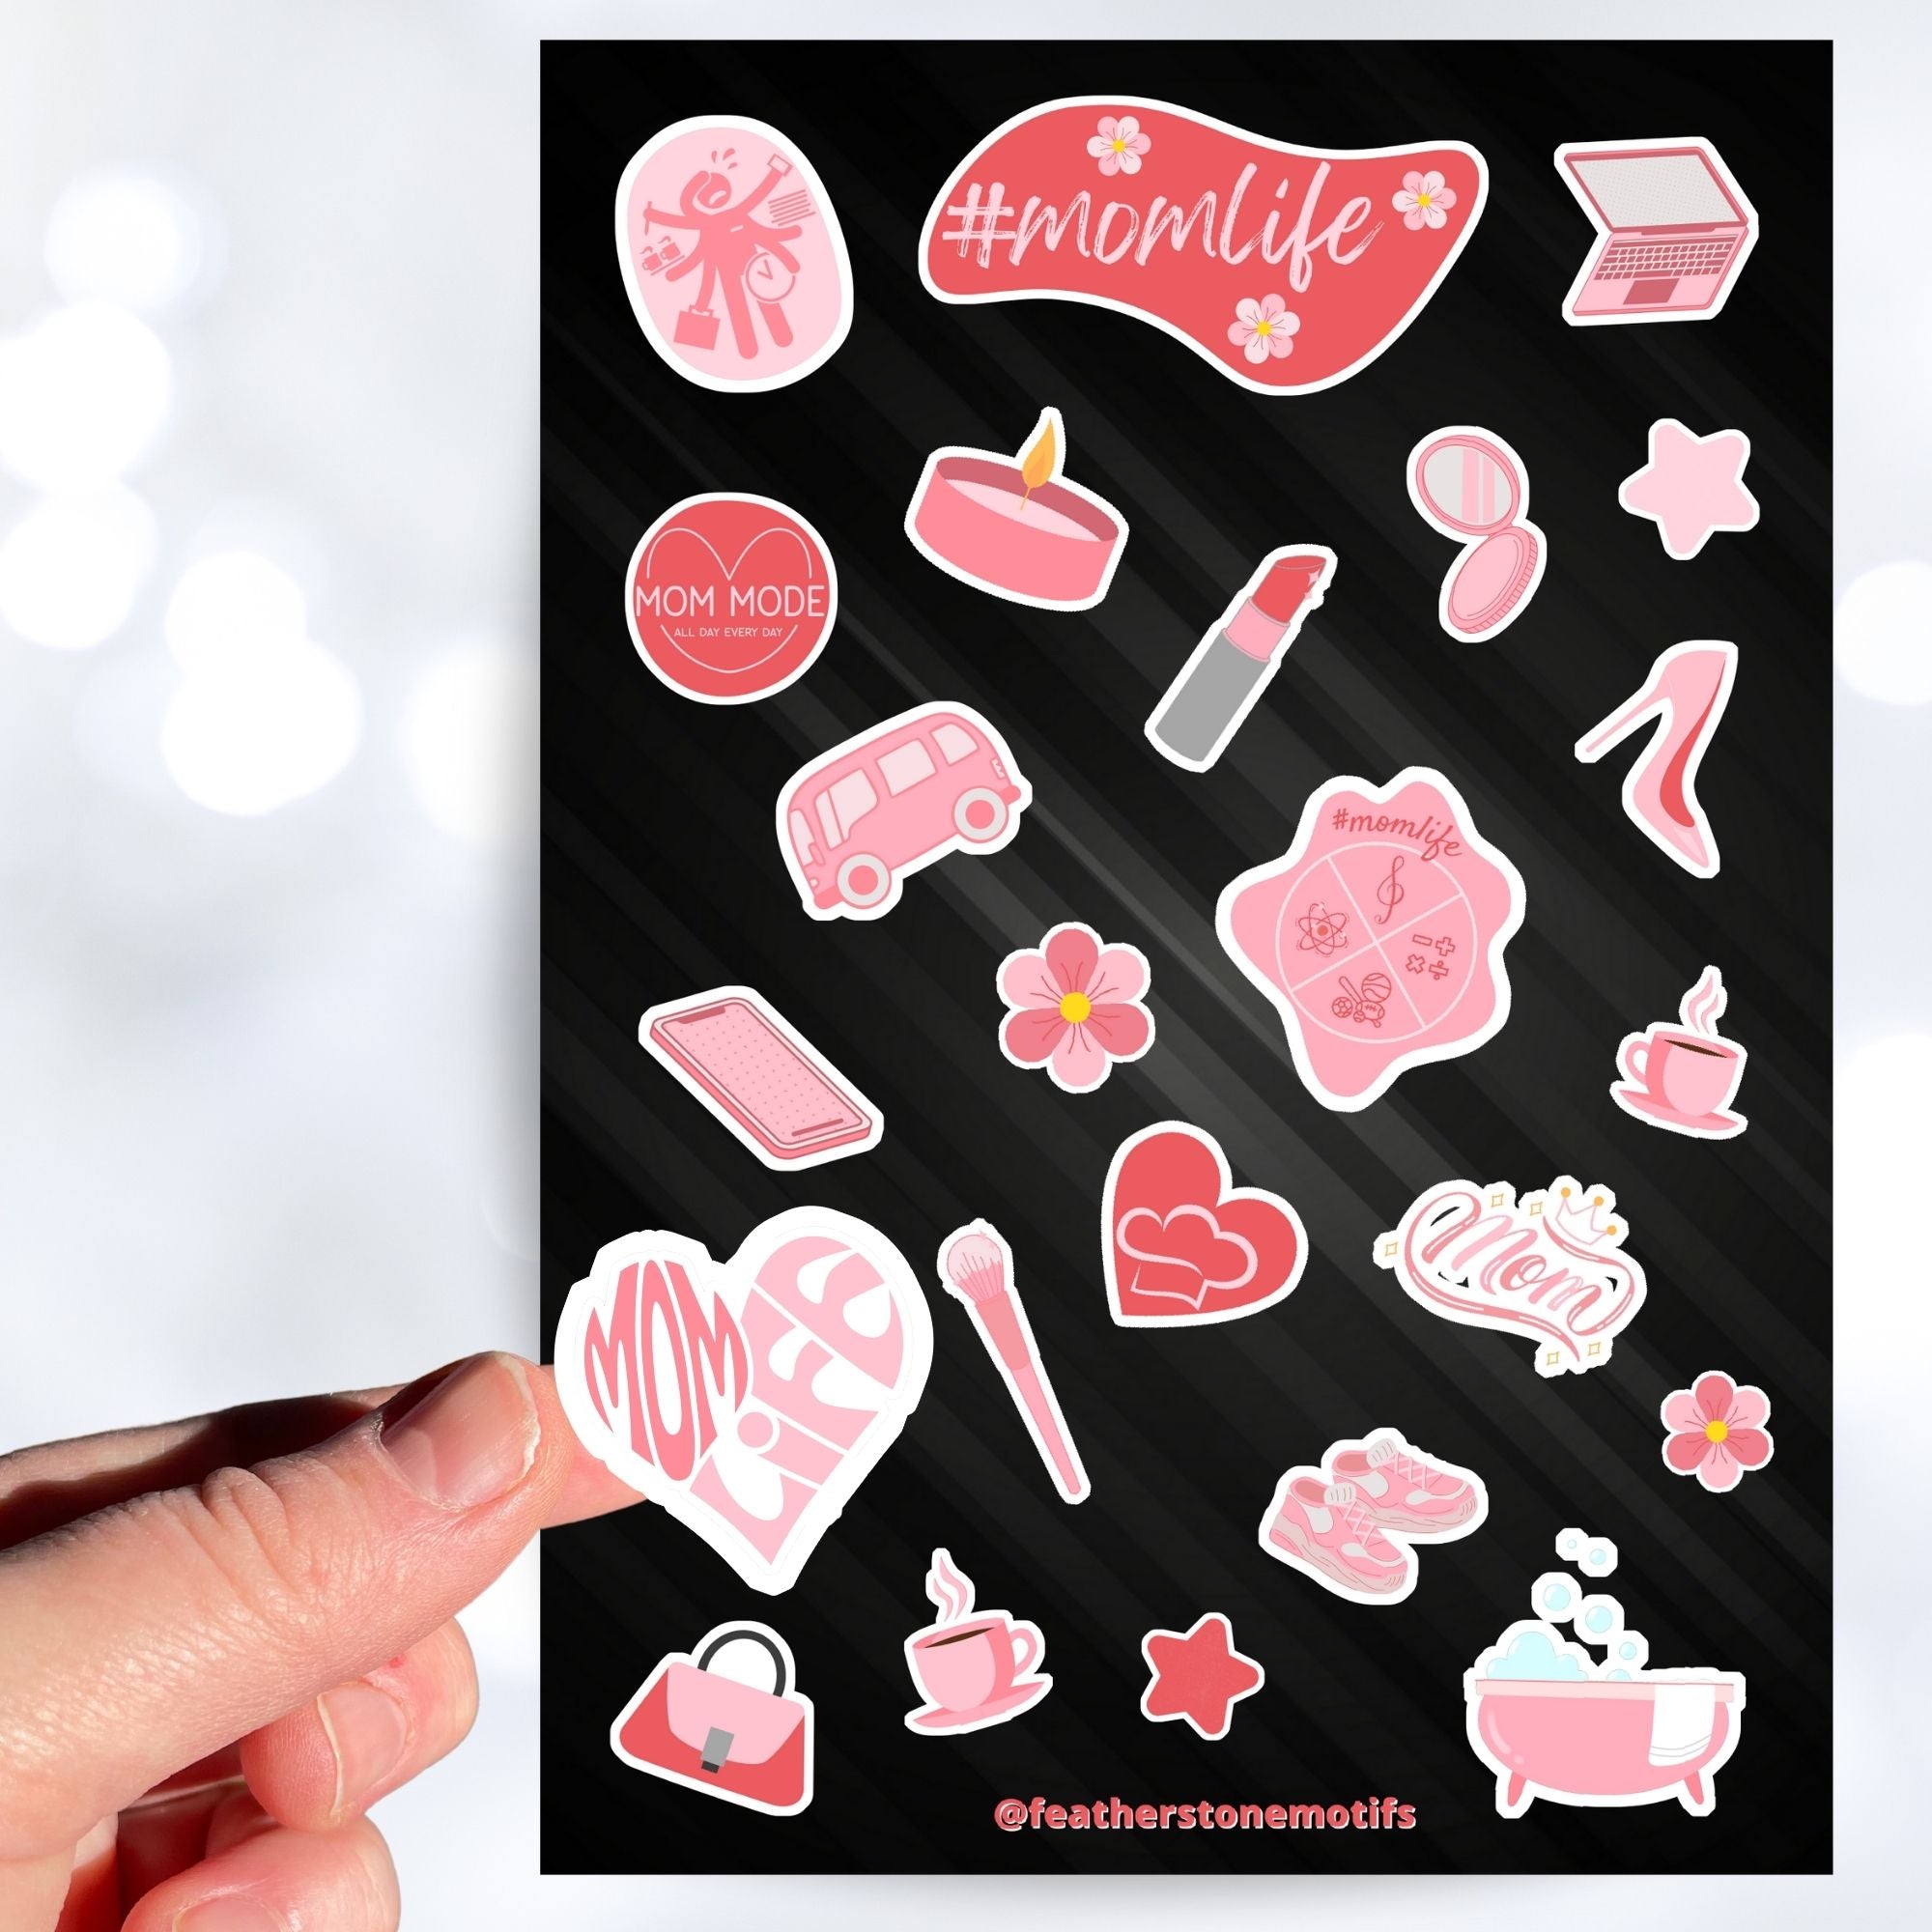 Let's celebrate mom! Mom's can do it all, and this pink aesthetic sticker sheet has sticker images of things that moms, and non-moms, enjoy like - candles, bubble baths, makeup, or coffee. This image shows a hand holding a sticker that says "Mom Life" in the shape of a heart above the sticker sheet.